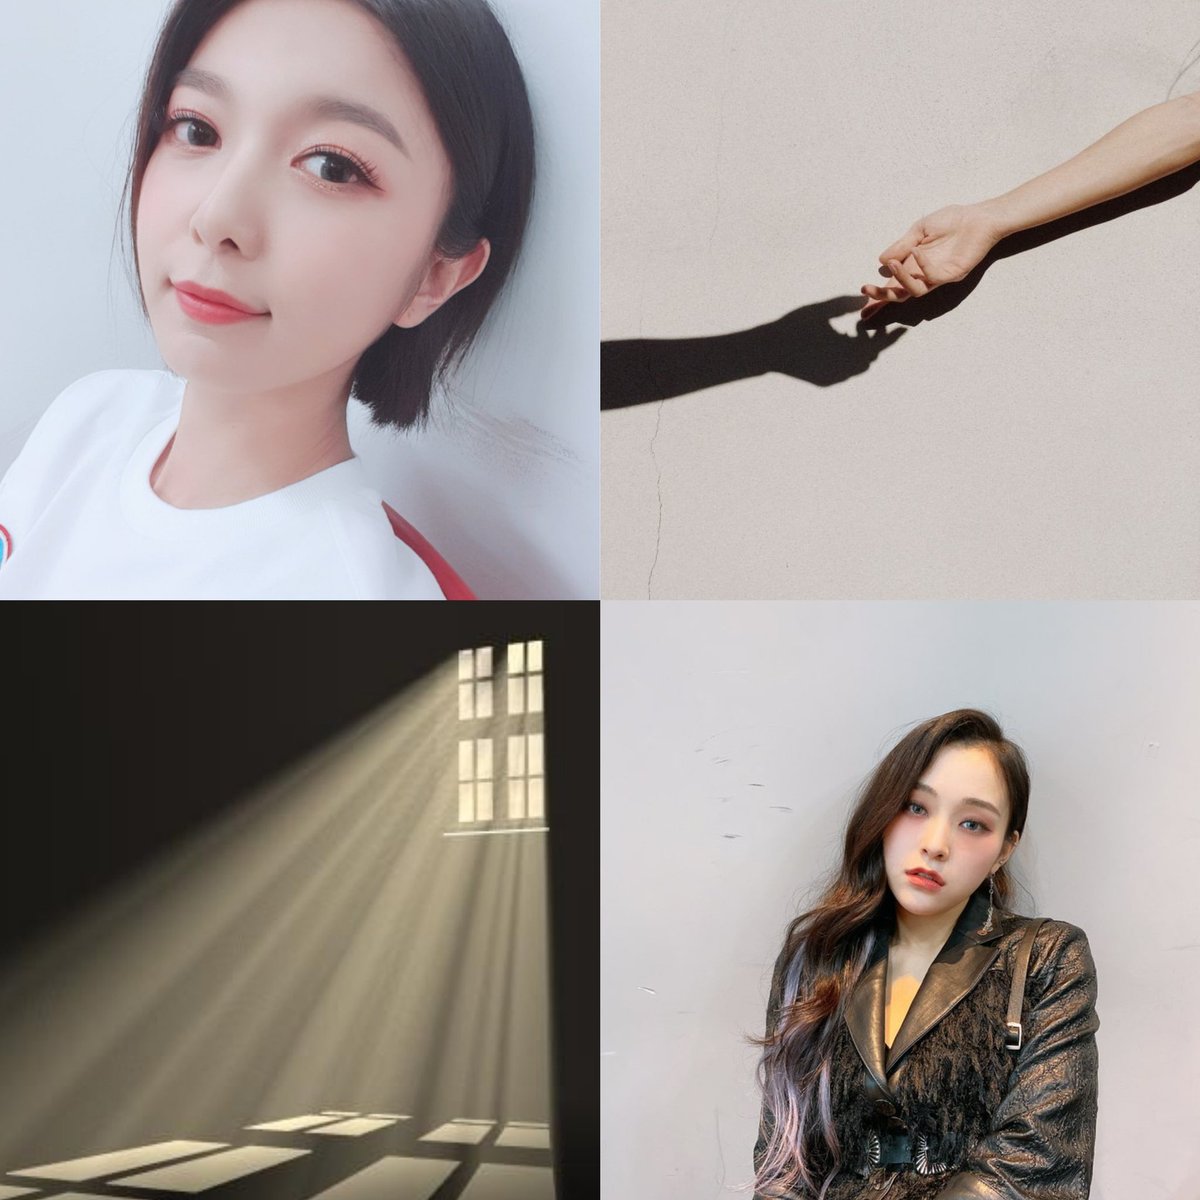 "i have nobody but you, save me now"yubin is imprisoned for trying to assassinate the dictator of the country. her days in the cell her lonely, until she hears a voice through the vents. yubin sees gahyeon as a glimmer of hope - unknowing that she is the dictator's daughter.